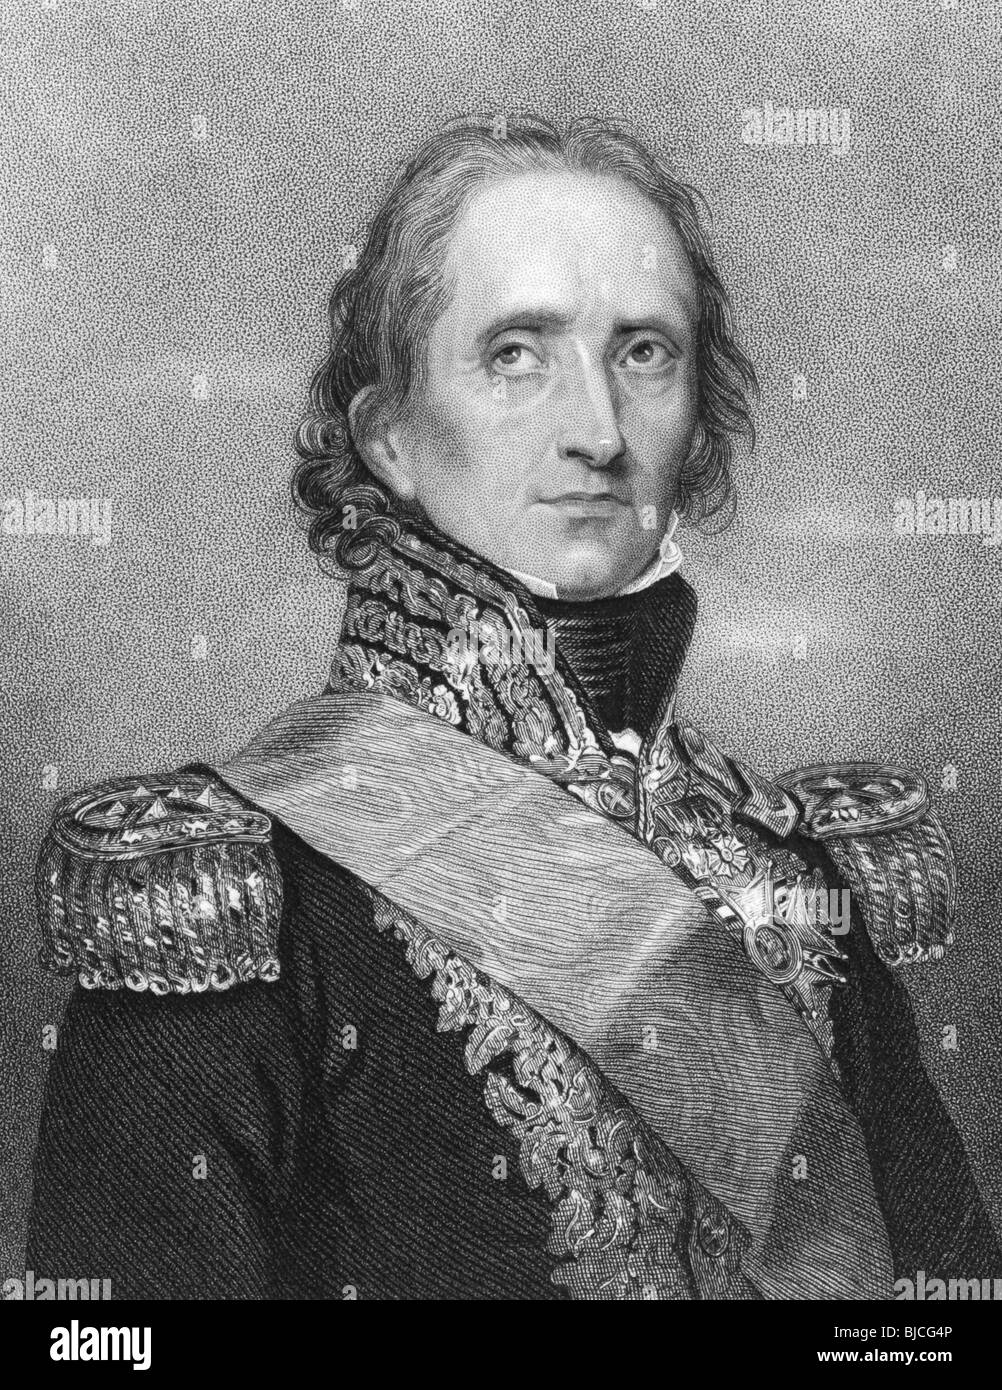 Jean-de-Dieu Soult (1769-1851) on engraving from the 1800s. French general and statesman, named Marshal of the Empire in 1804. Stock Photo